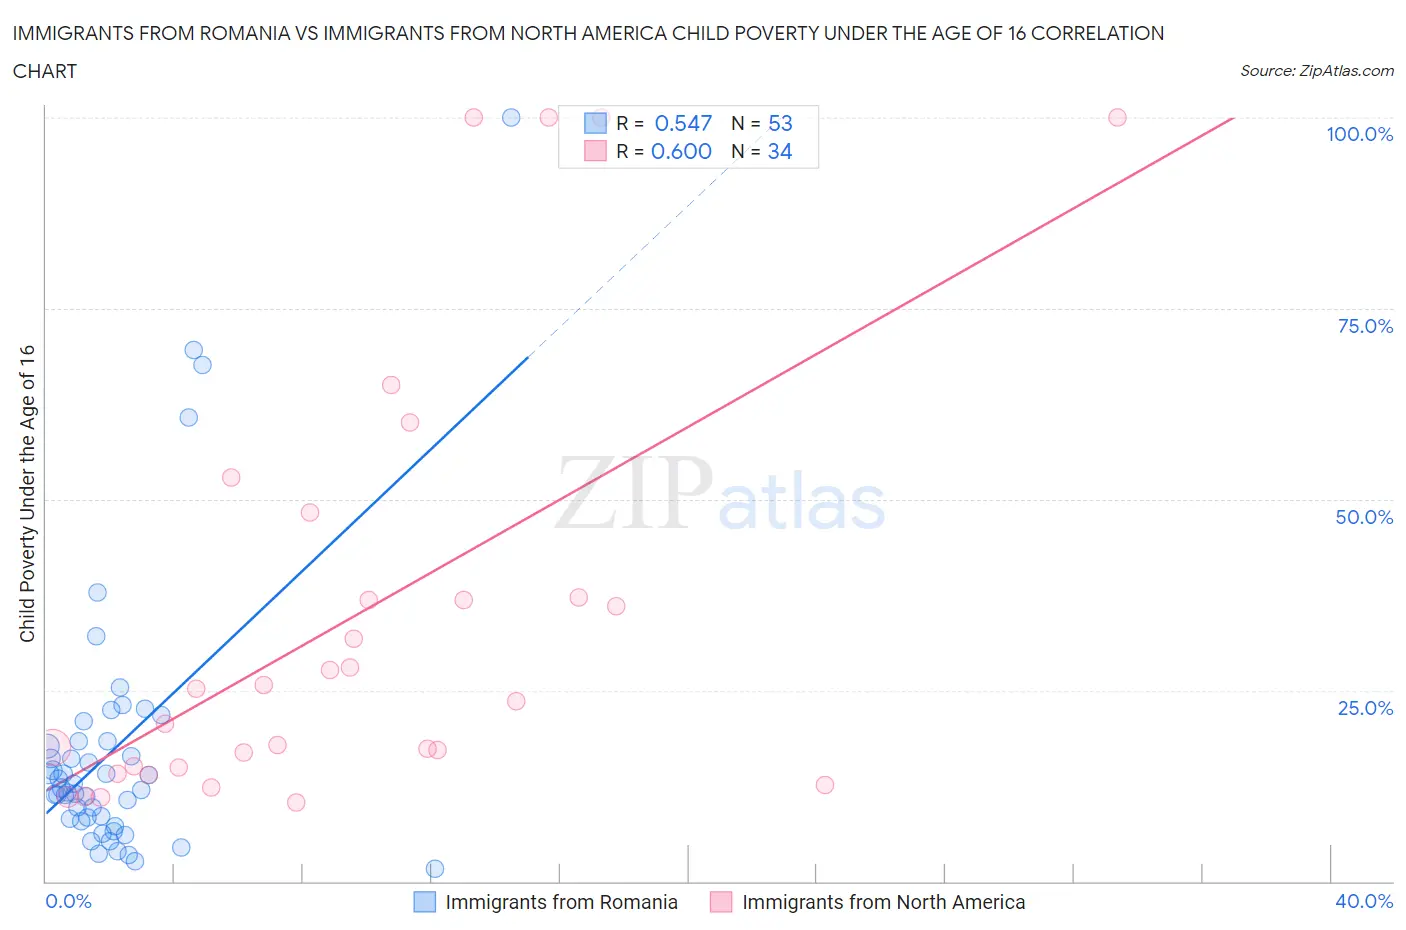 Immigrants from Romania vs Immigrants from North America Child Poverty Under the Age of 16